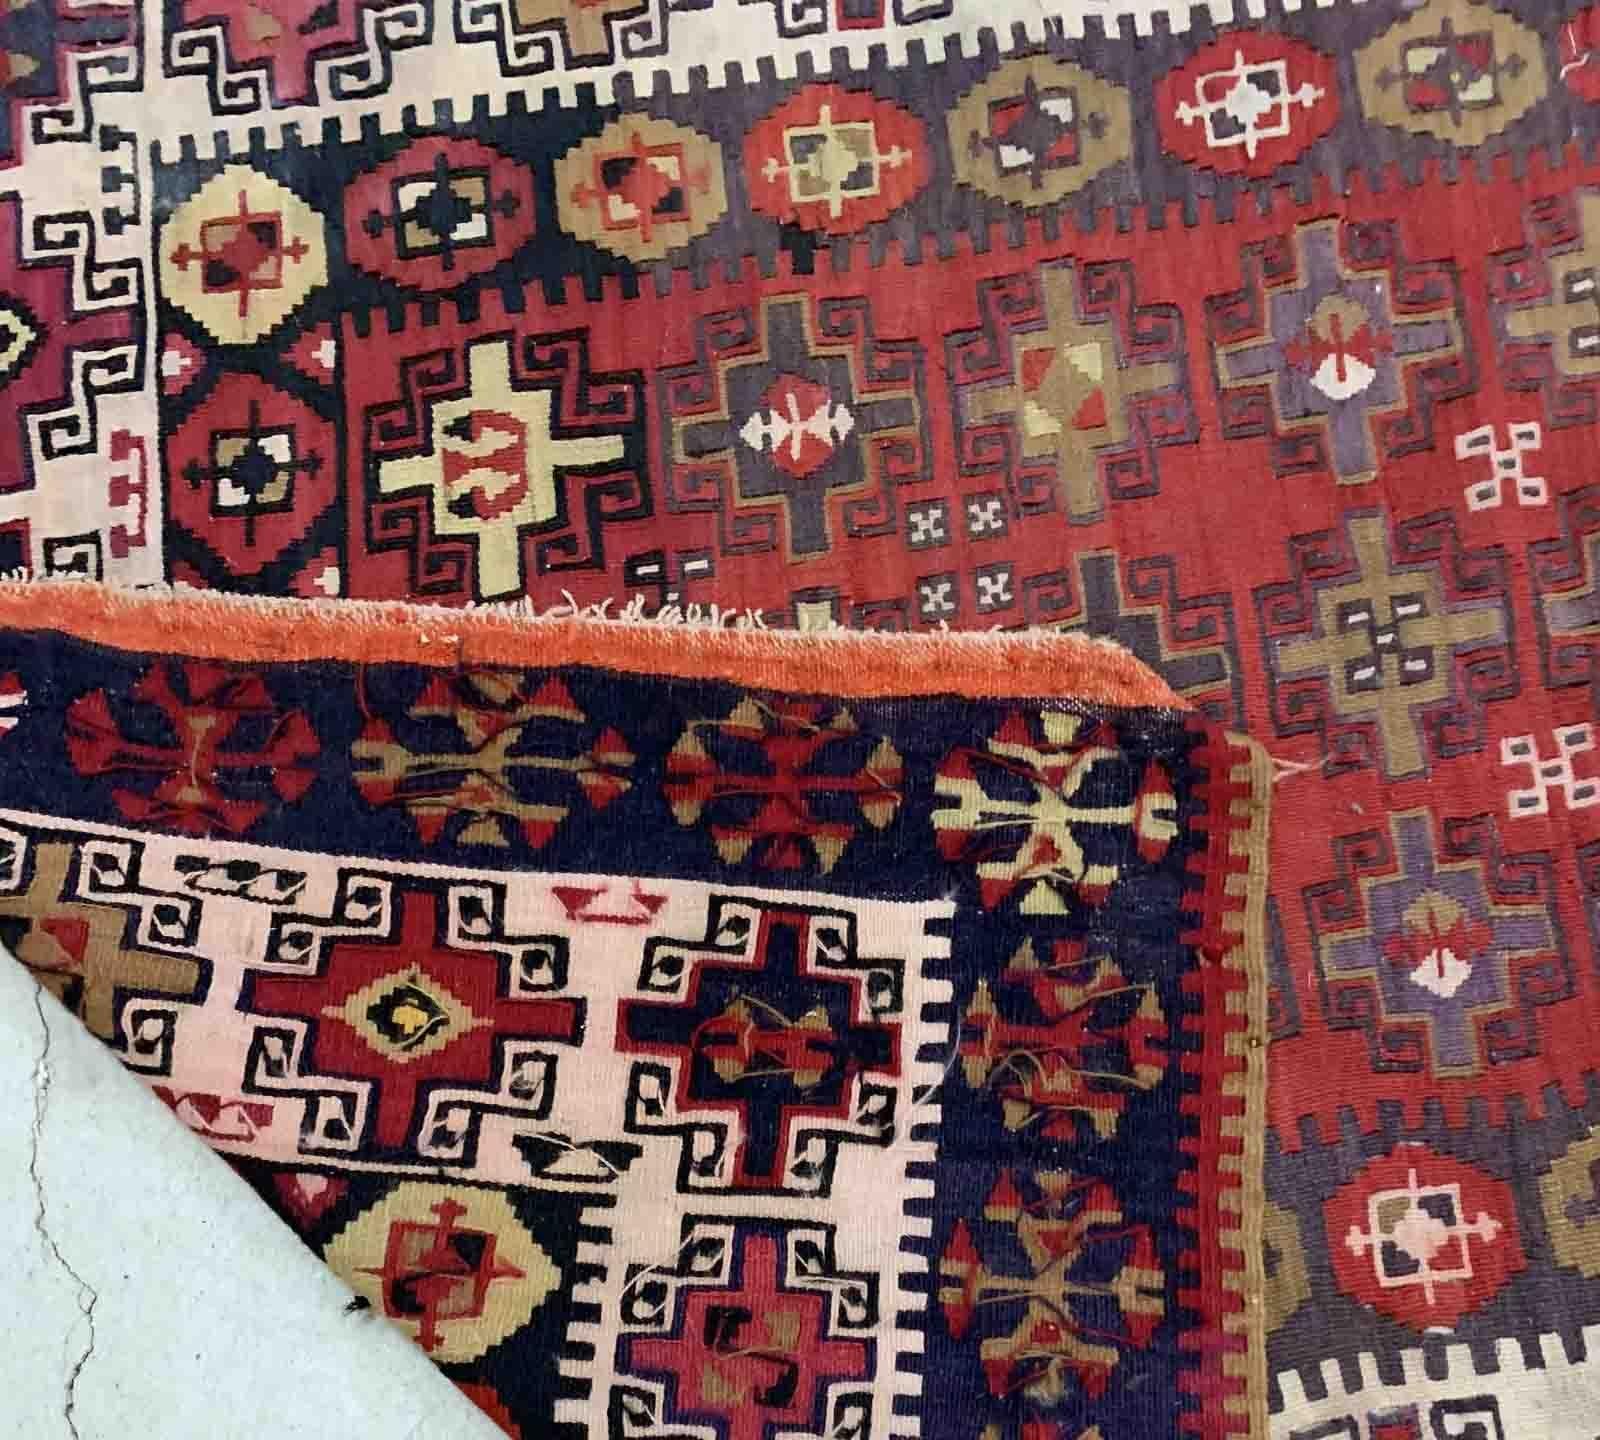 Handmade antique prayer Turkish kilim in bright shades. The rug is from the beginning of 20th century in original good condition.

-condition: original good,

-circa: 1900s,

-size: 4.5' x 6.2' (137cm x 189cm),
?
-material: wool,

-country